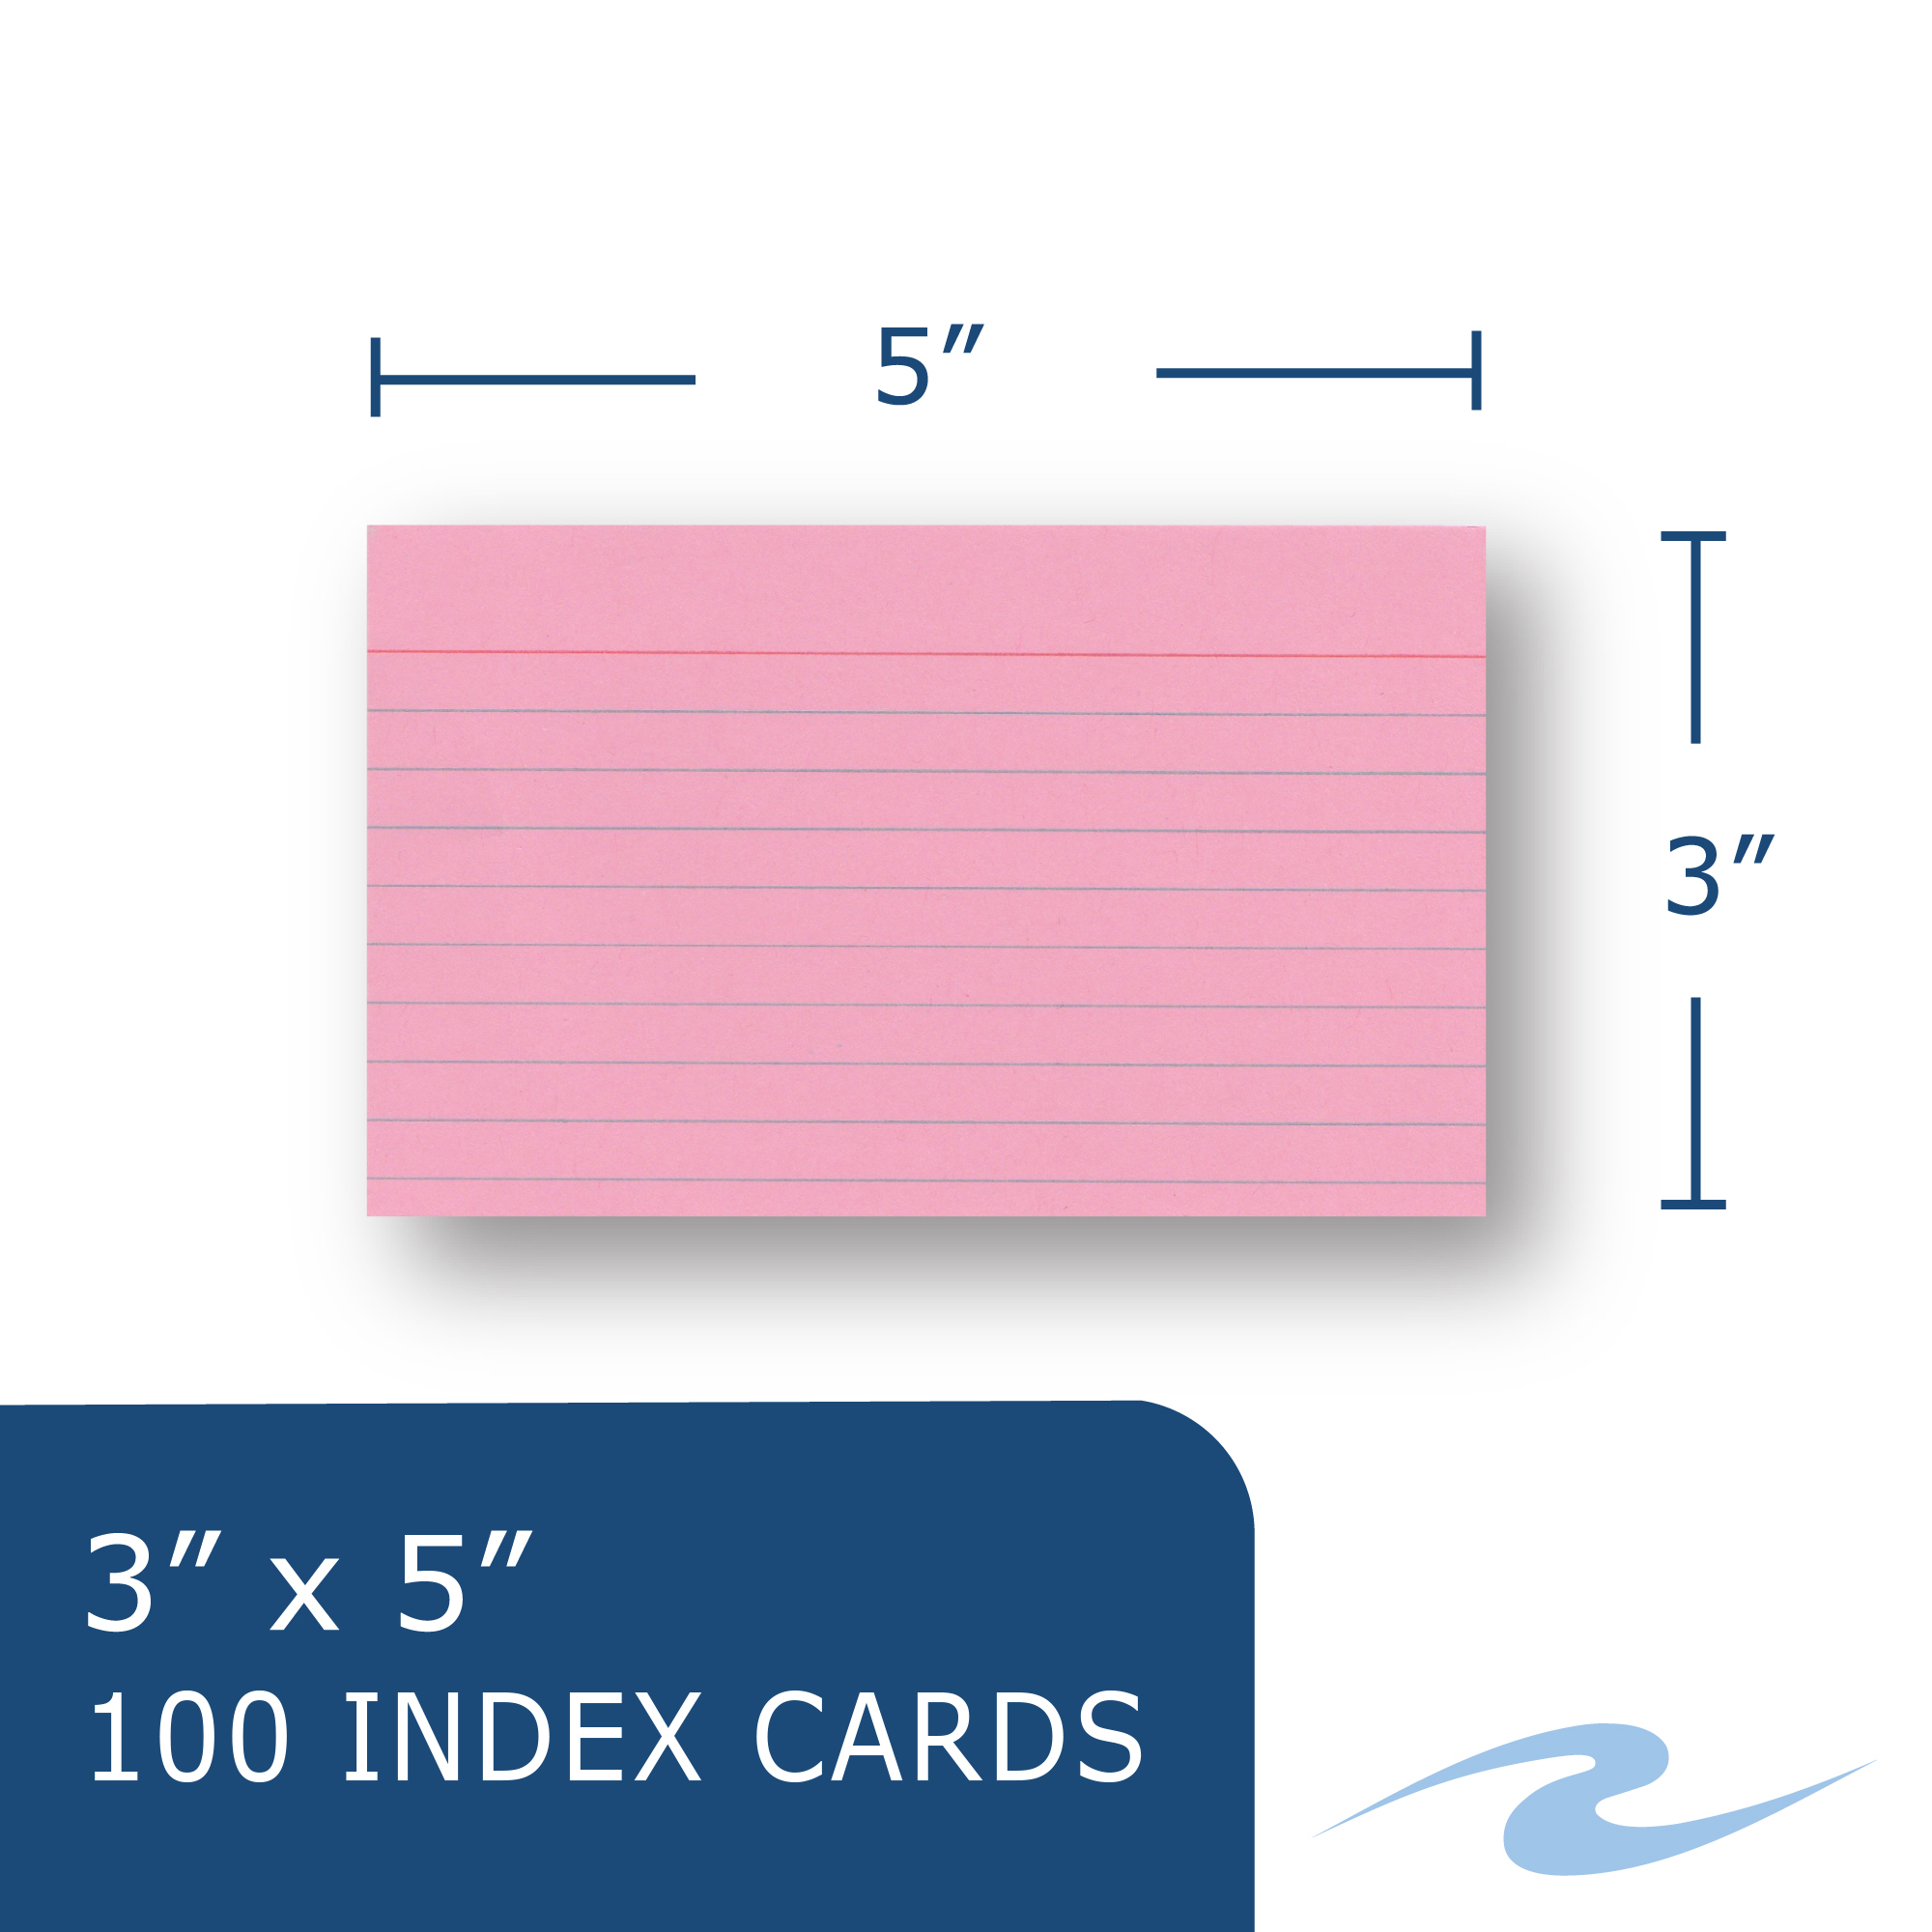 Colored Index Cards 3x5 Lined - Roaring Spring Paper Products